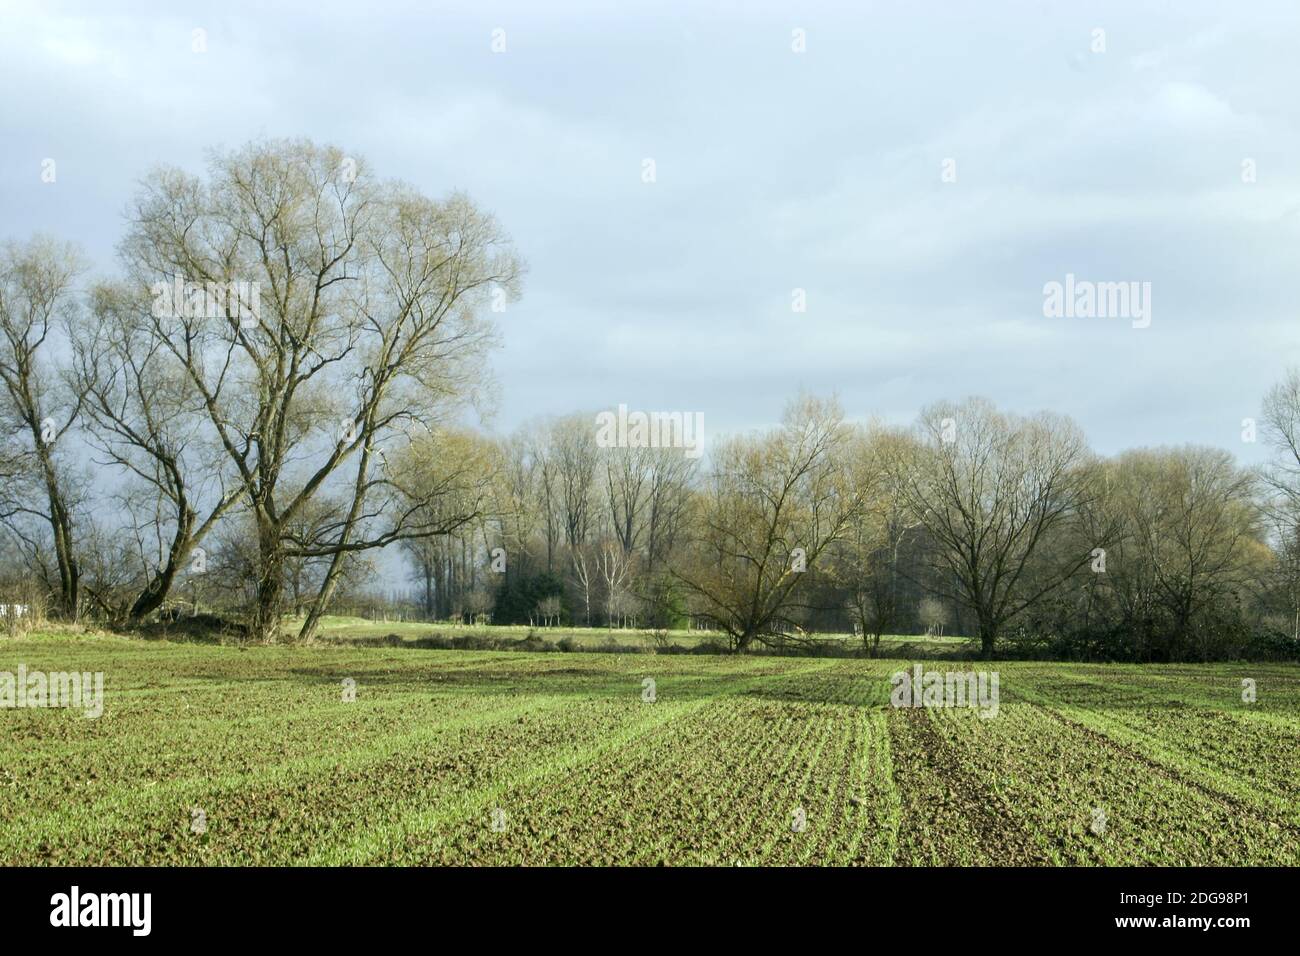 Field with winter cereals Stock Photo